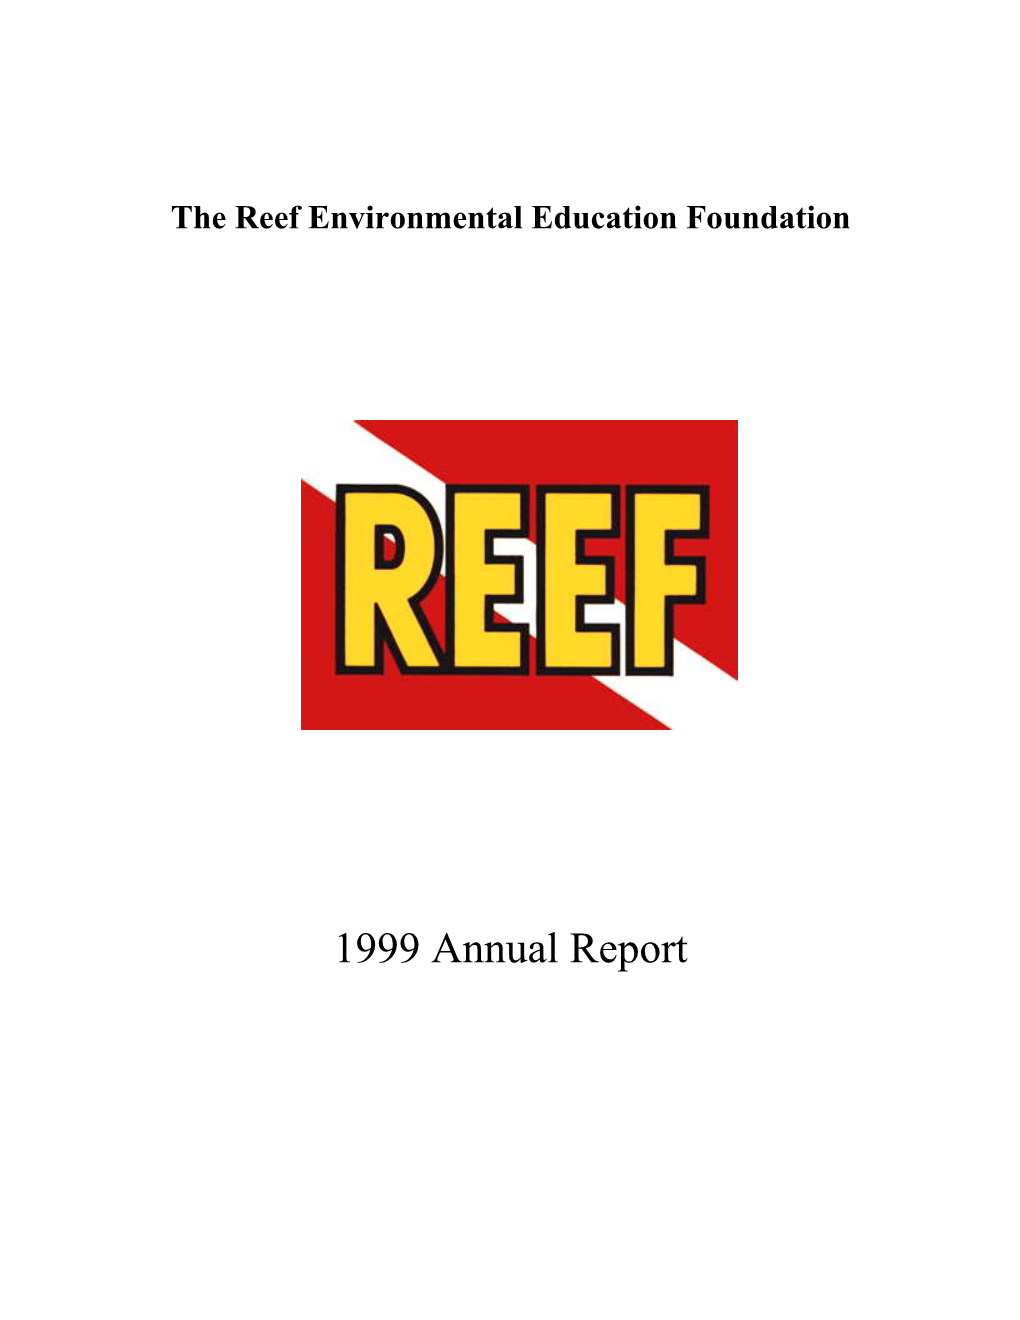 1999 Annual Report REEF Board, Staff and Advisors